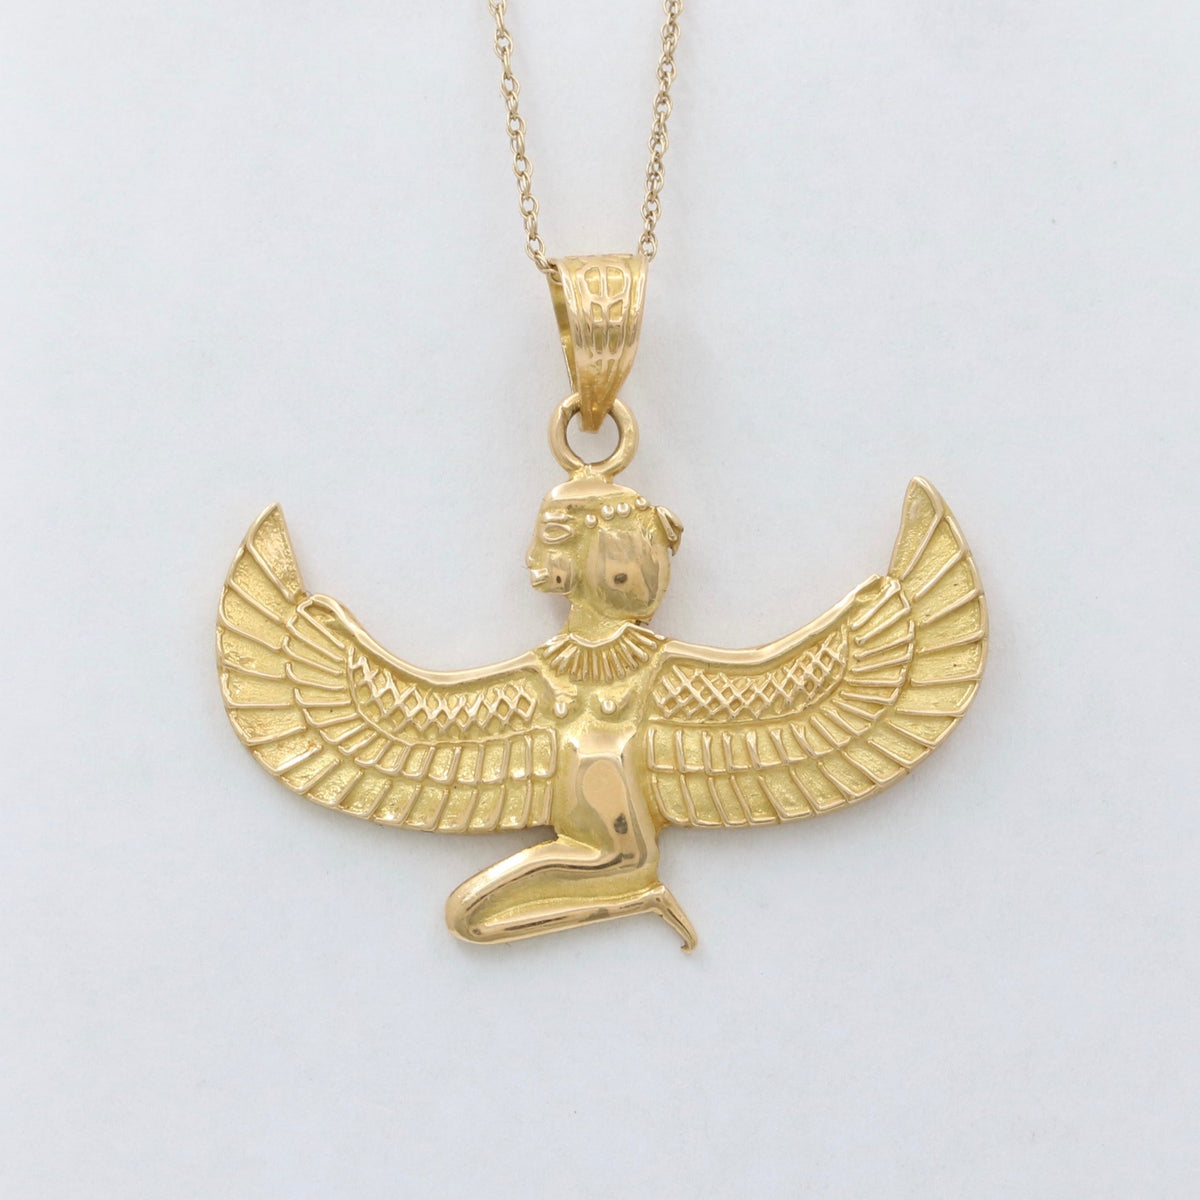 Vintage 18K Gold Nefertiti Charm, 5.5 Grams and 1.25” Wide